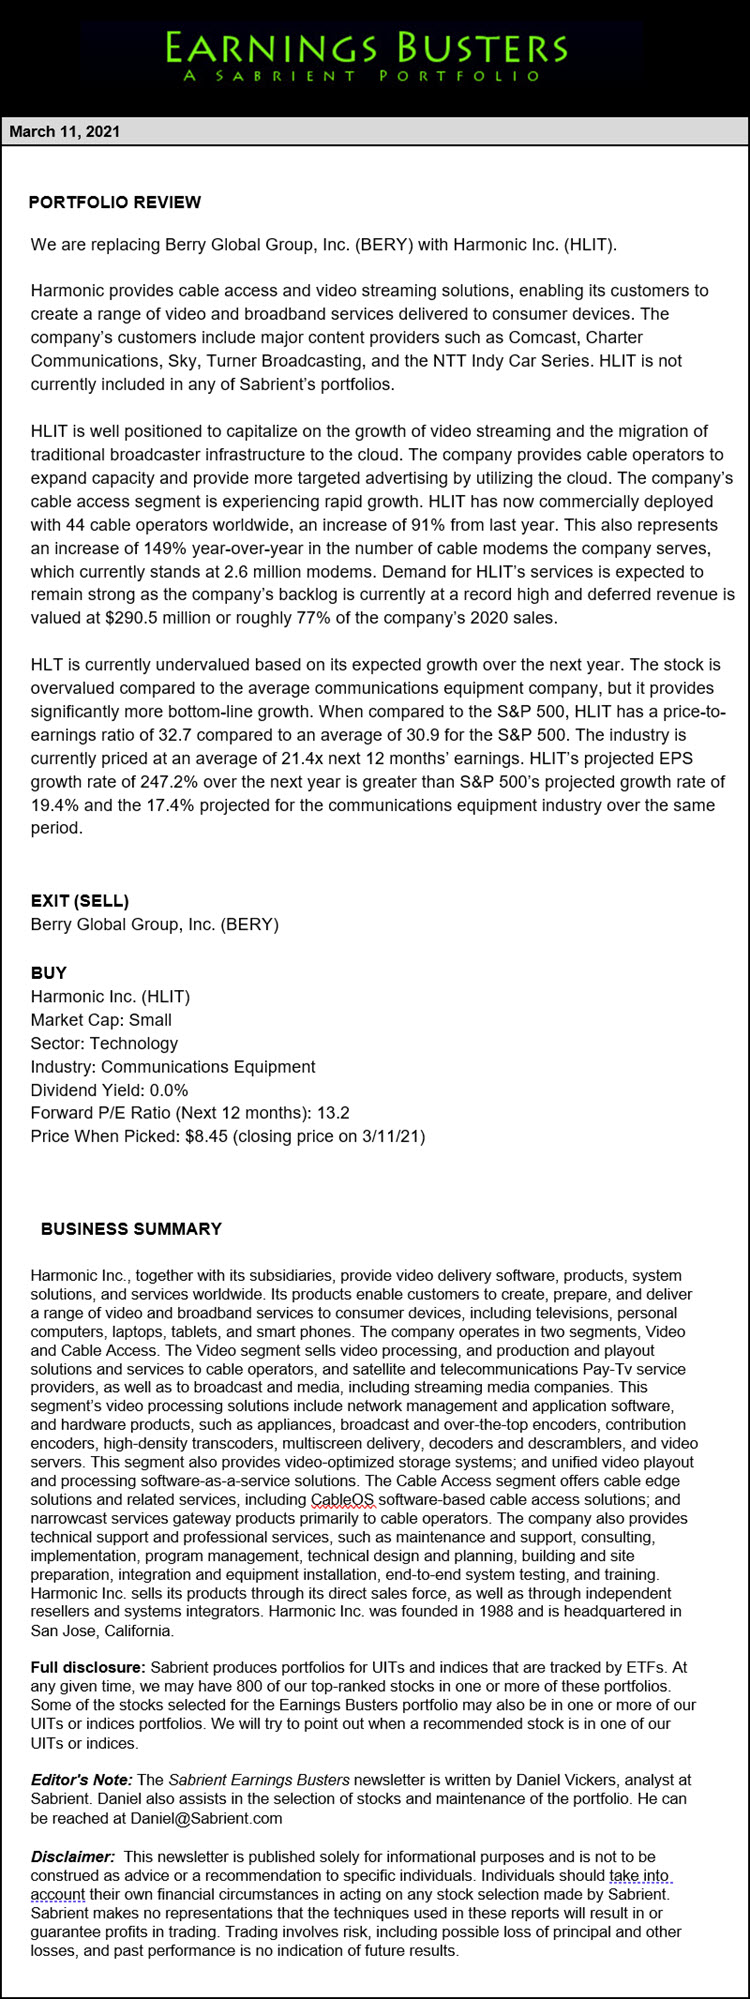 Earnings Busters Newsletter - March 11, 2021